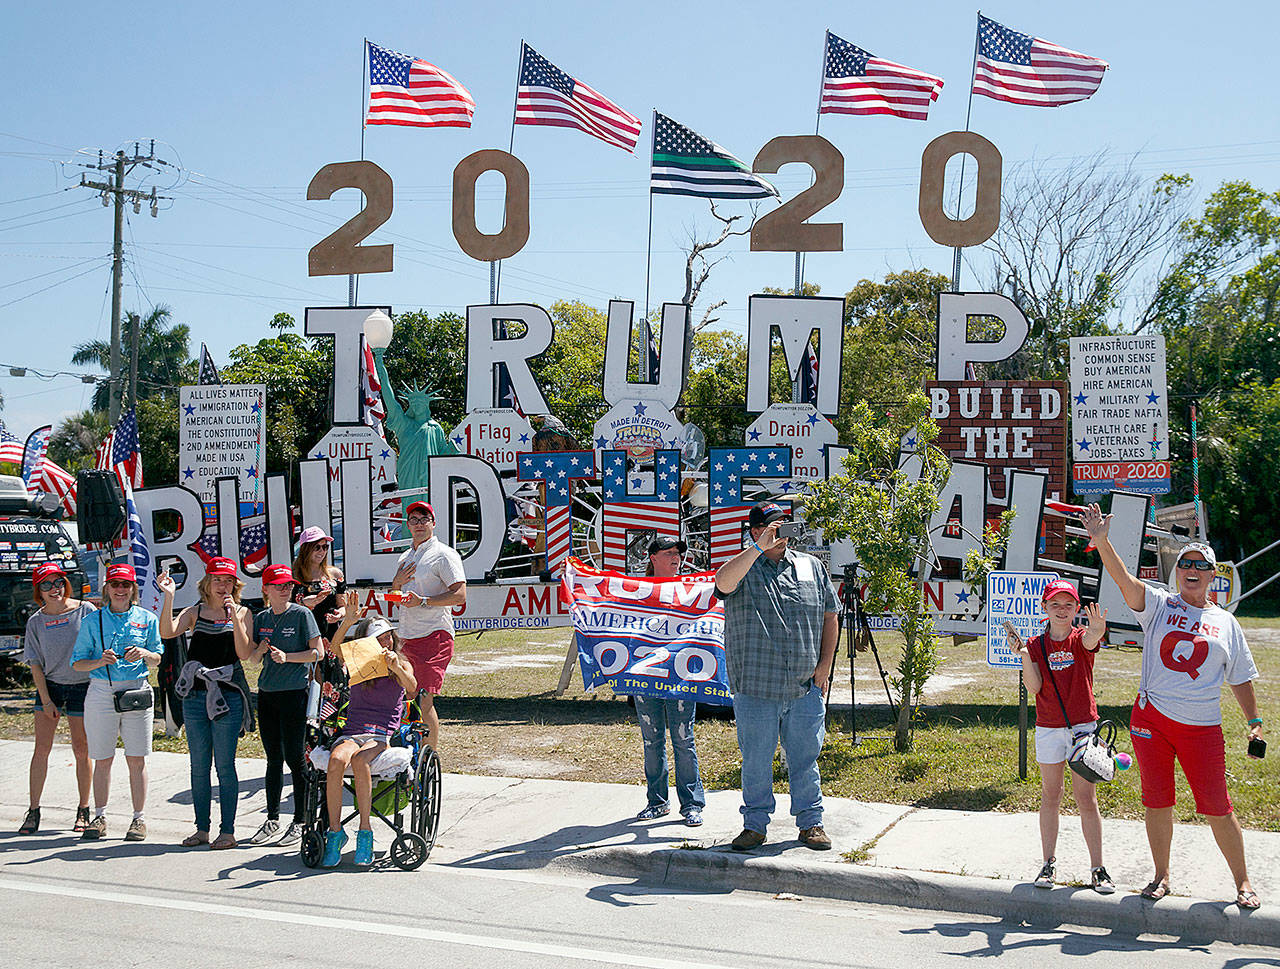 Supporters of President Donald Trump are seen from the media van in the motorcade accompanying the president in West Palm Beach, Fla., Saturday, March 23, en route to Mar-a-Lago in Palm Beach, Fla. (AP Photo/Carolyn Kaster)